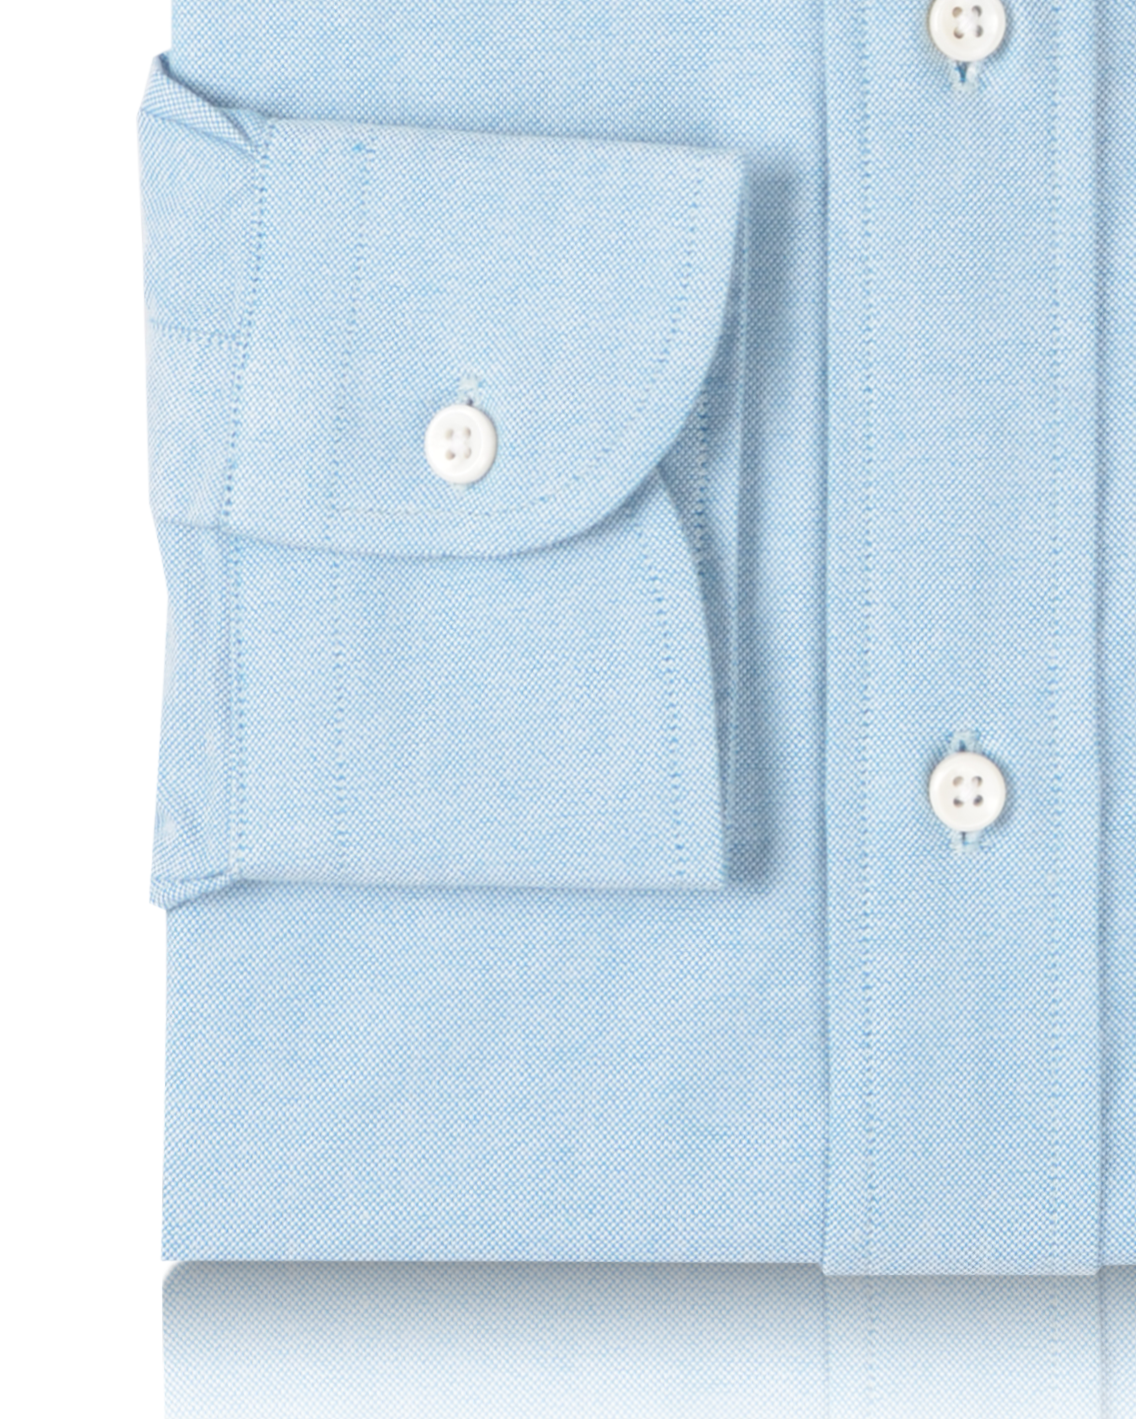 Cuff of the custom oxford shirt for men by Luxire in aqua blue